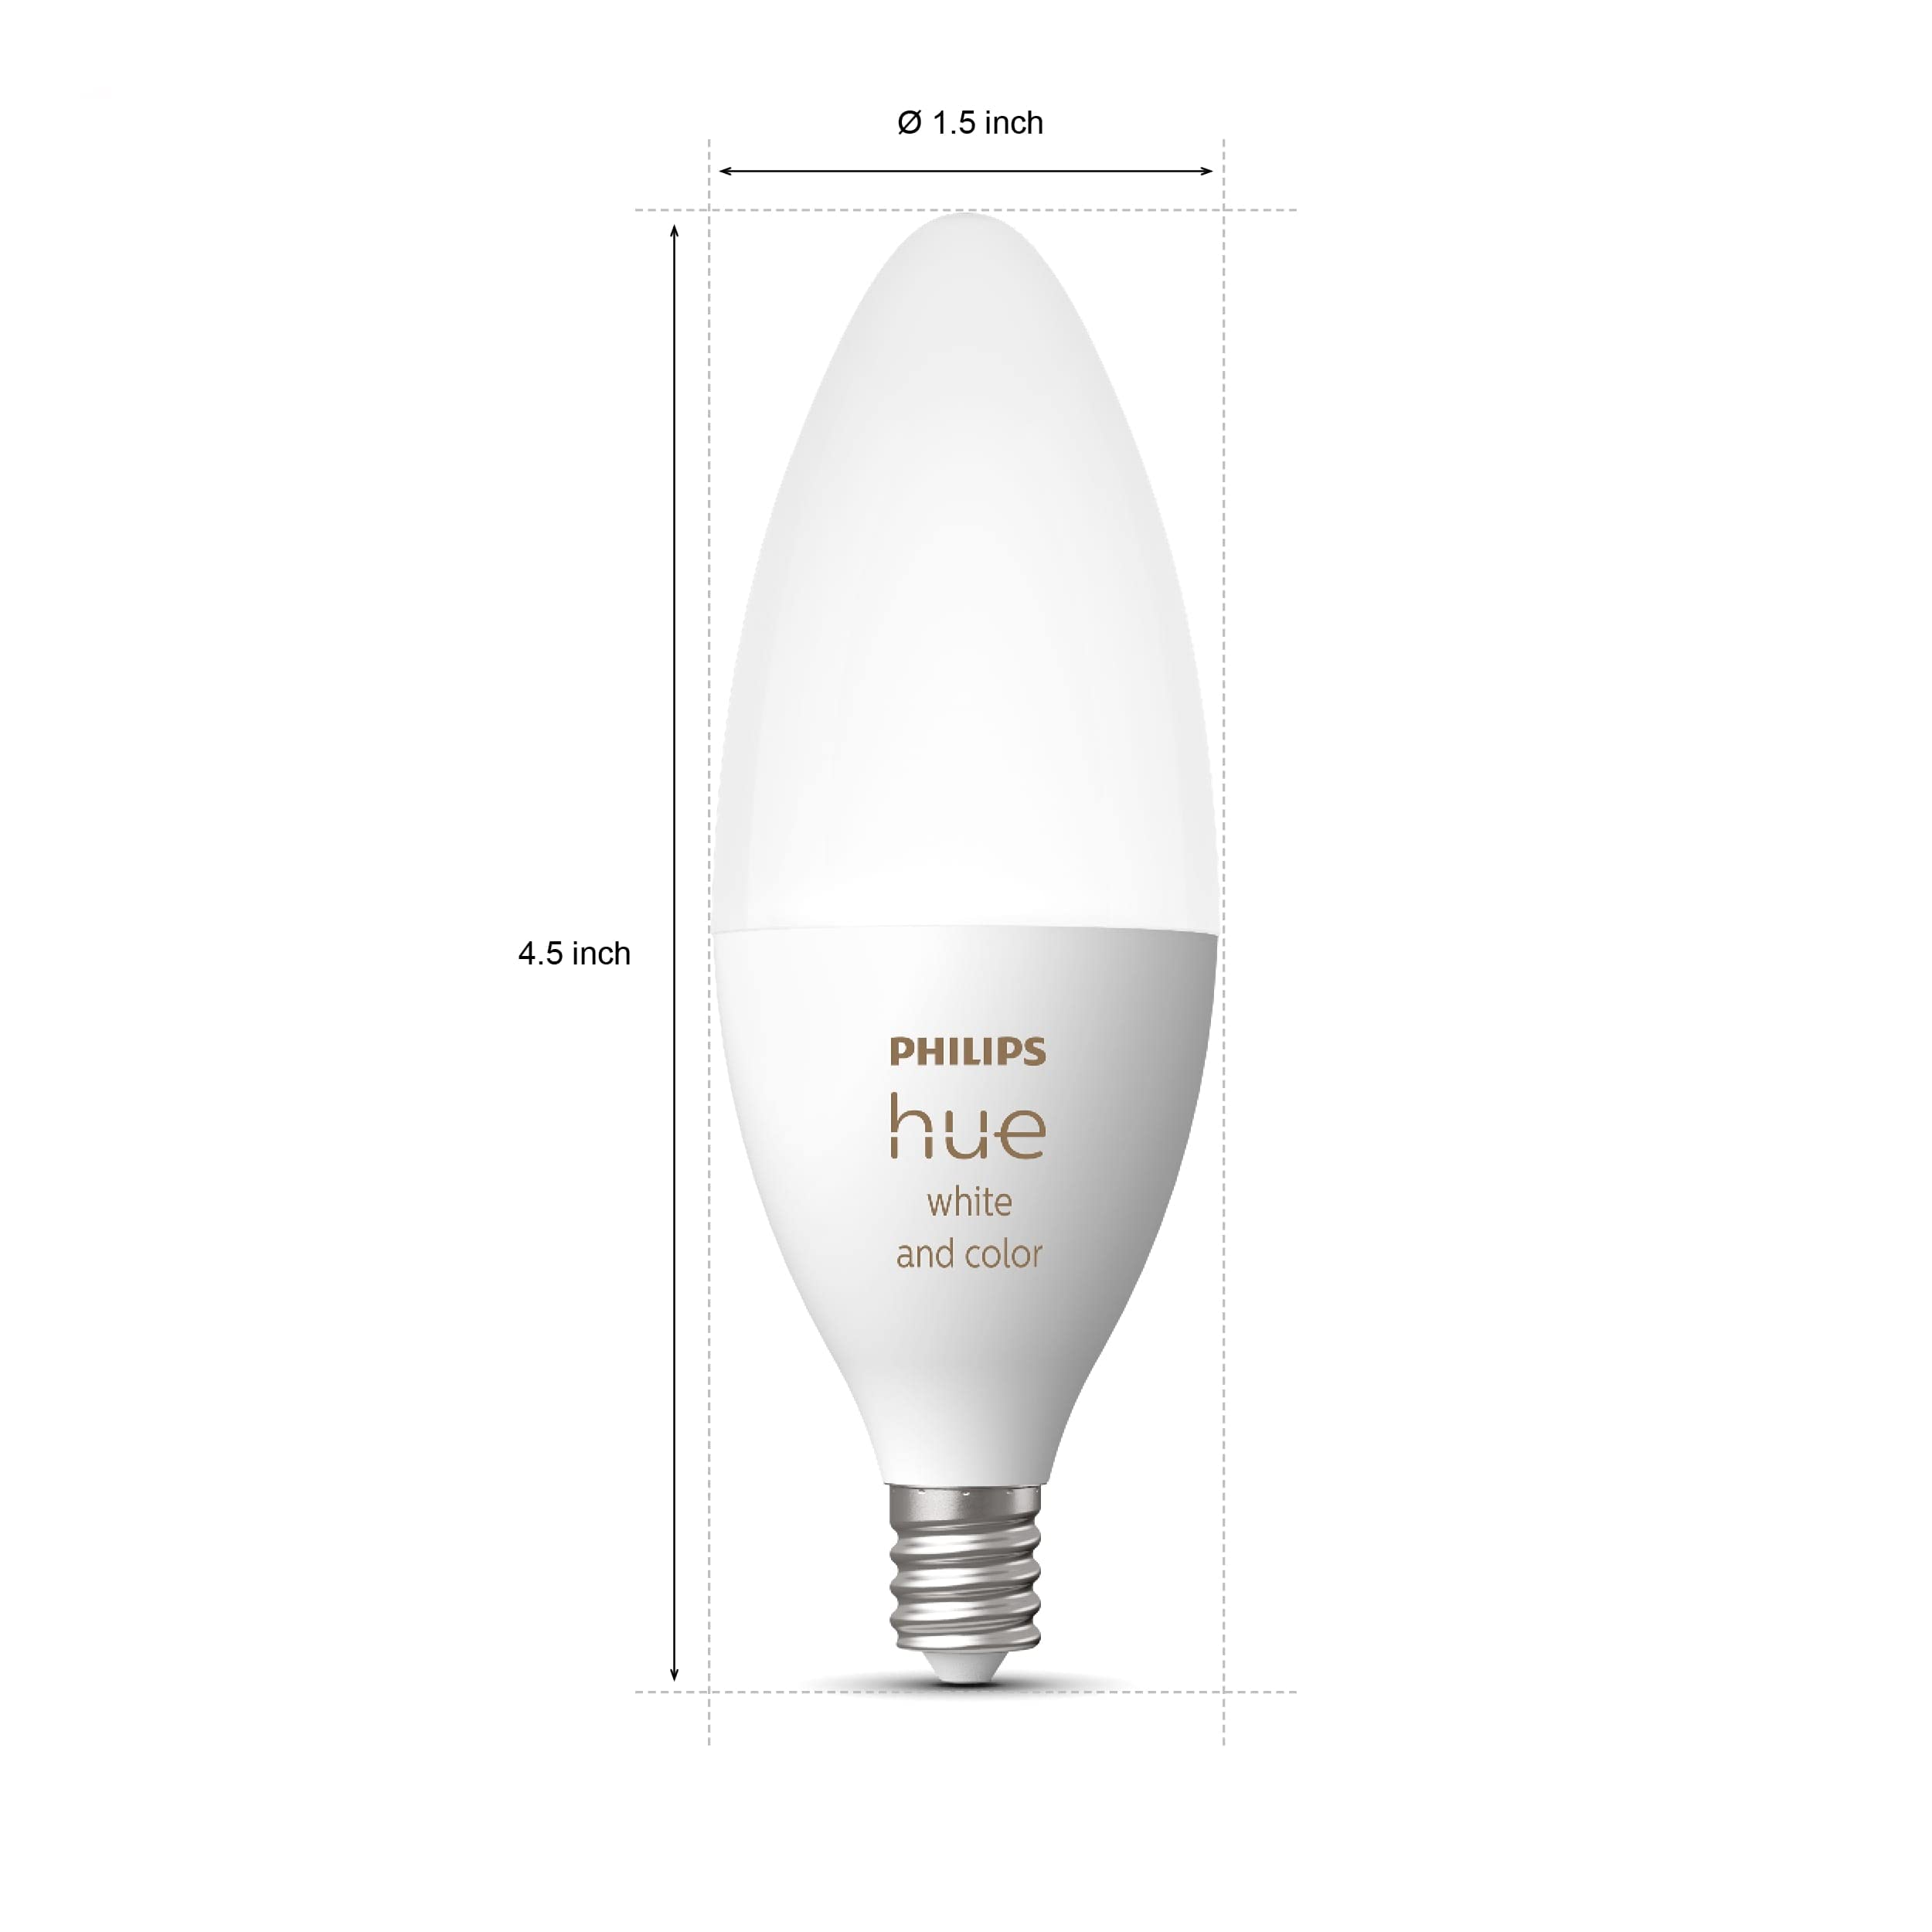 Philips Hue White and Color Ambiance Smart LED Candle with E12 Candelabra Base - 1 Pack - Color Changing Light for Chandeliers - Works with Amazon Alexa, Apple HomeKit and Google Assistant